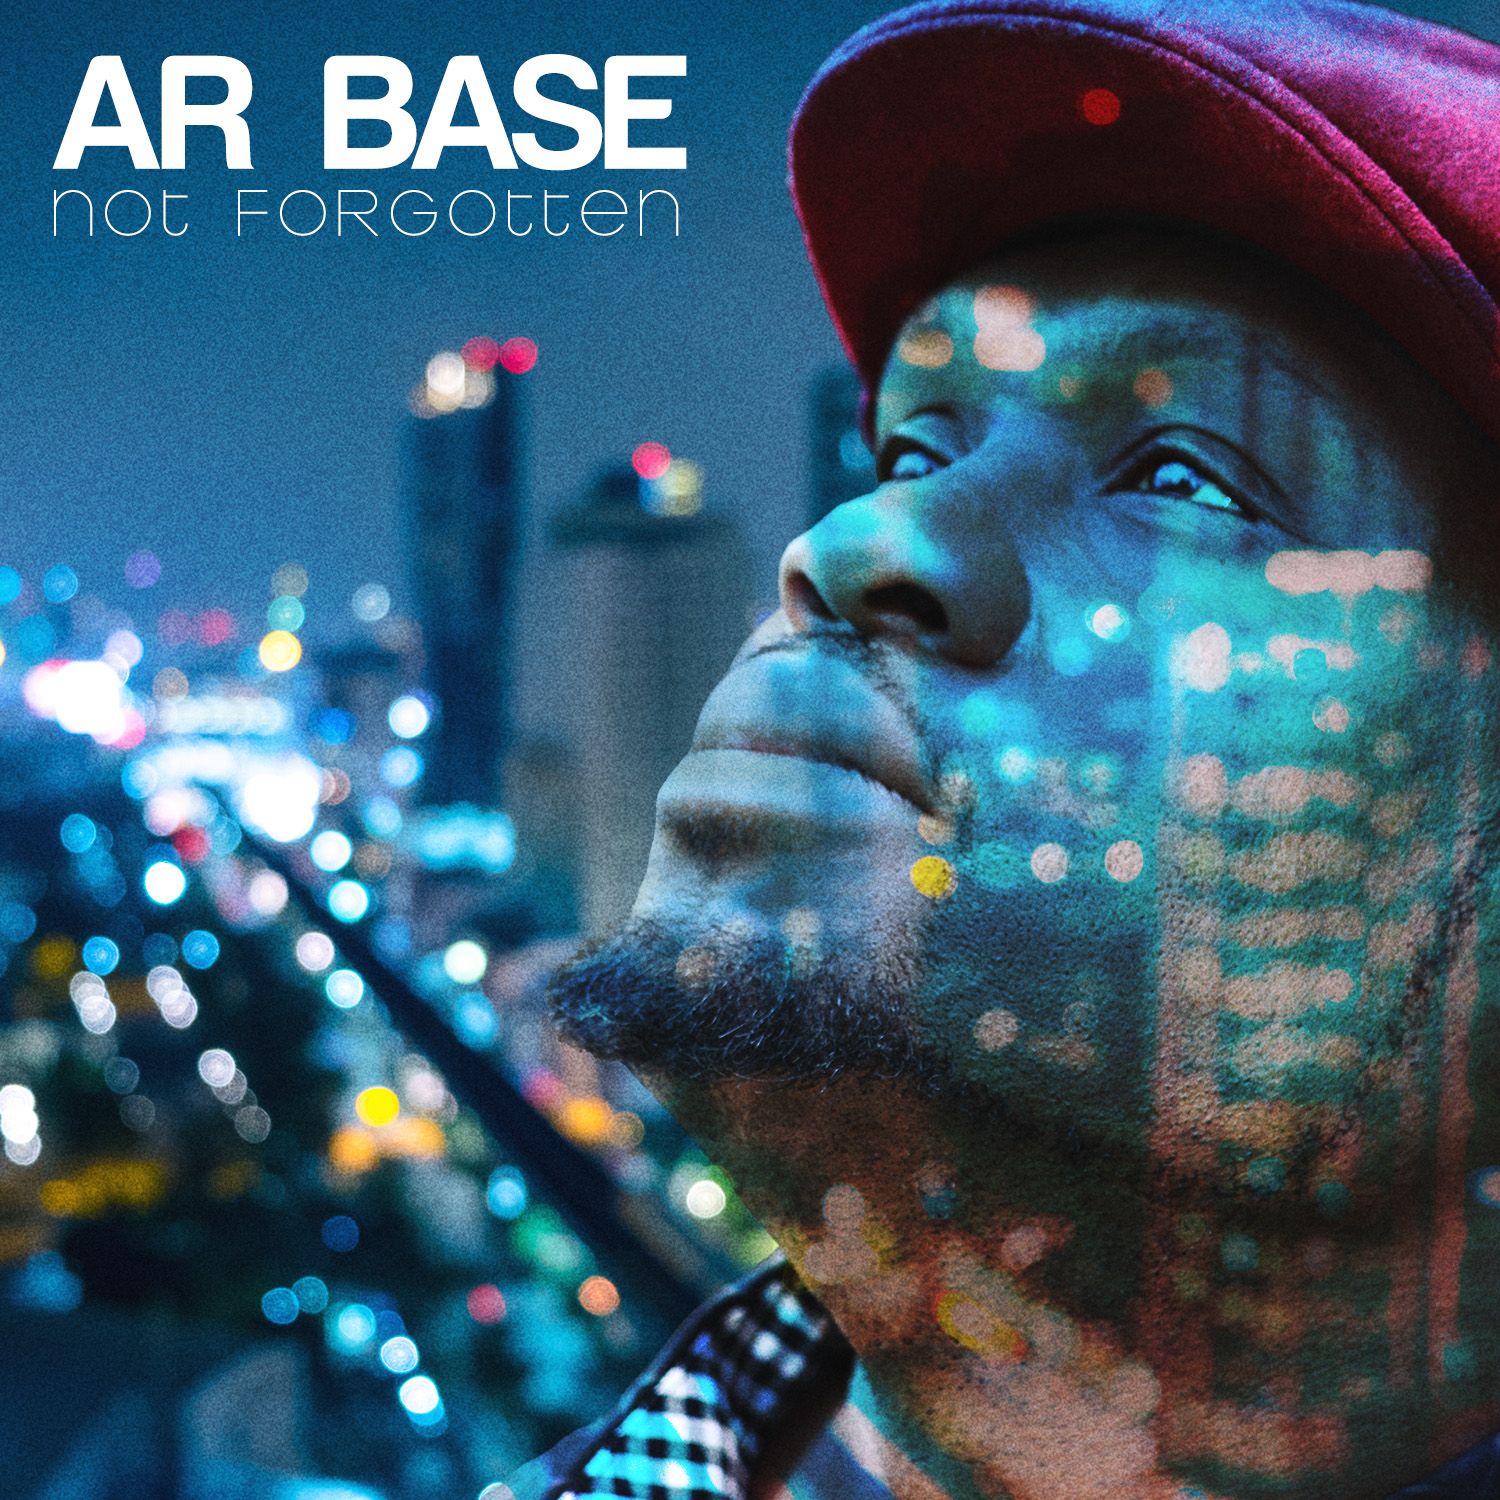 AR Base Gives Us Food For The Soul In “Not Forgotten”